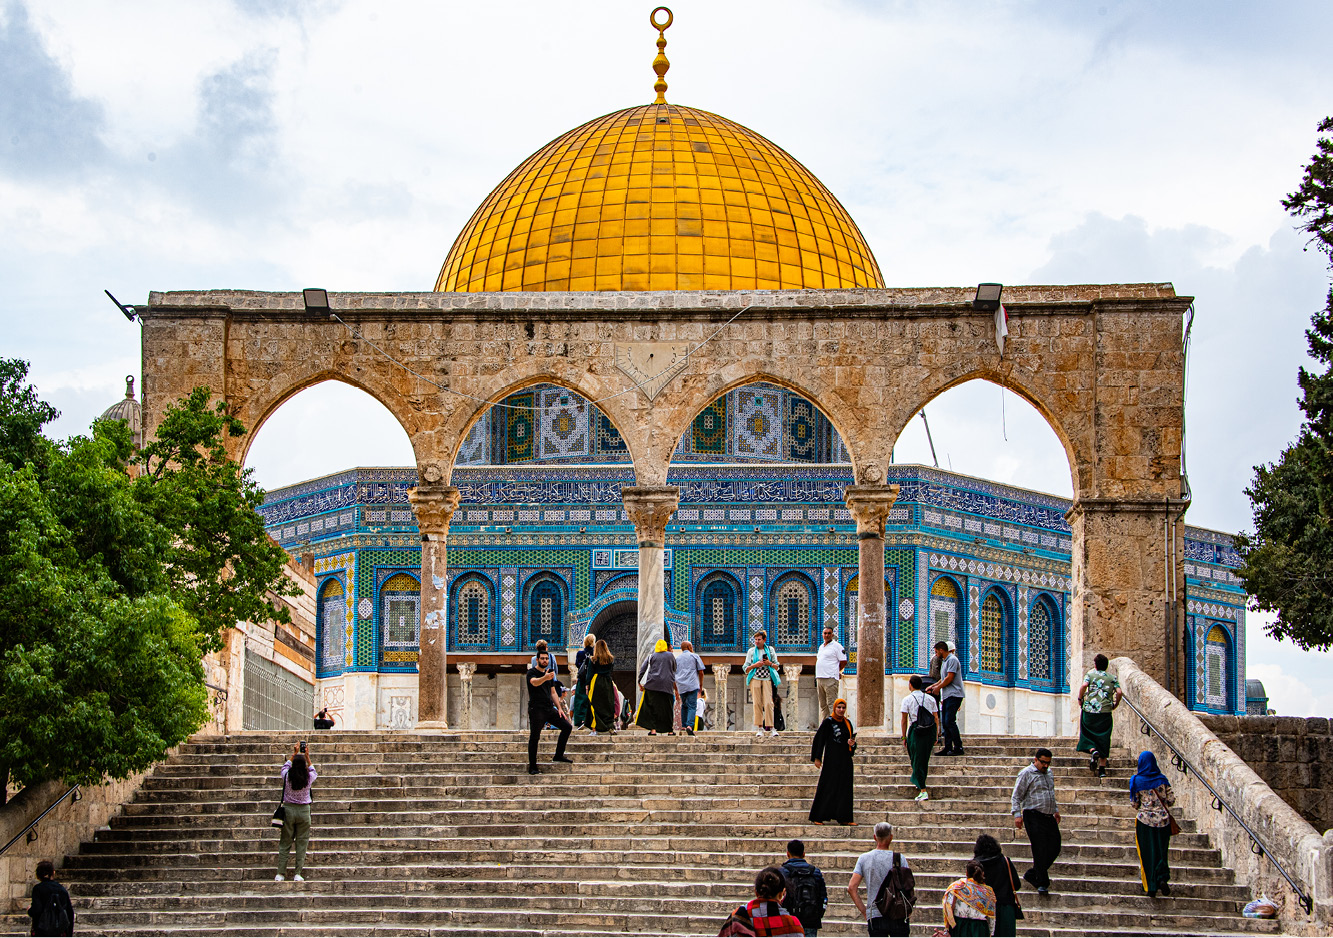 The blue tiles of Islam’s sacred golden Dome of the Rock on Old City Jerusalem’s Temple Mount dazzles the senses.